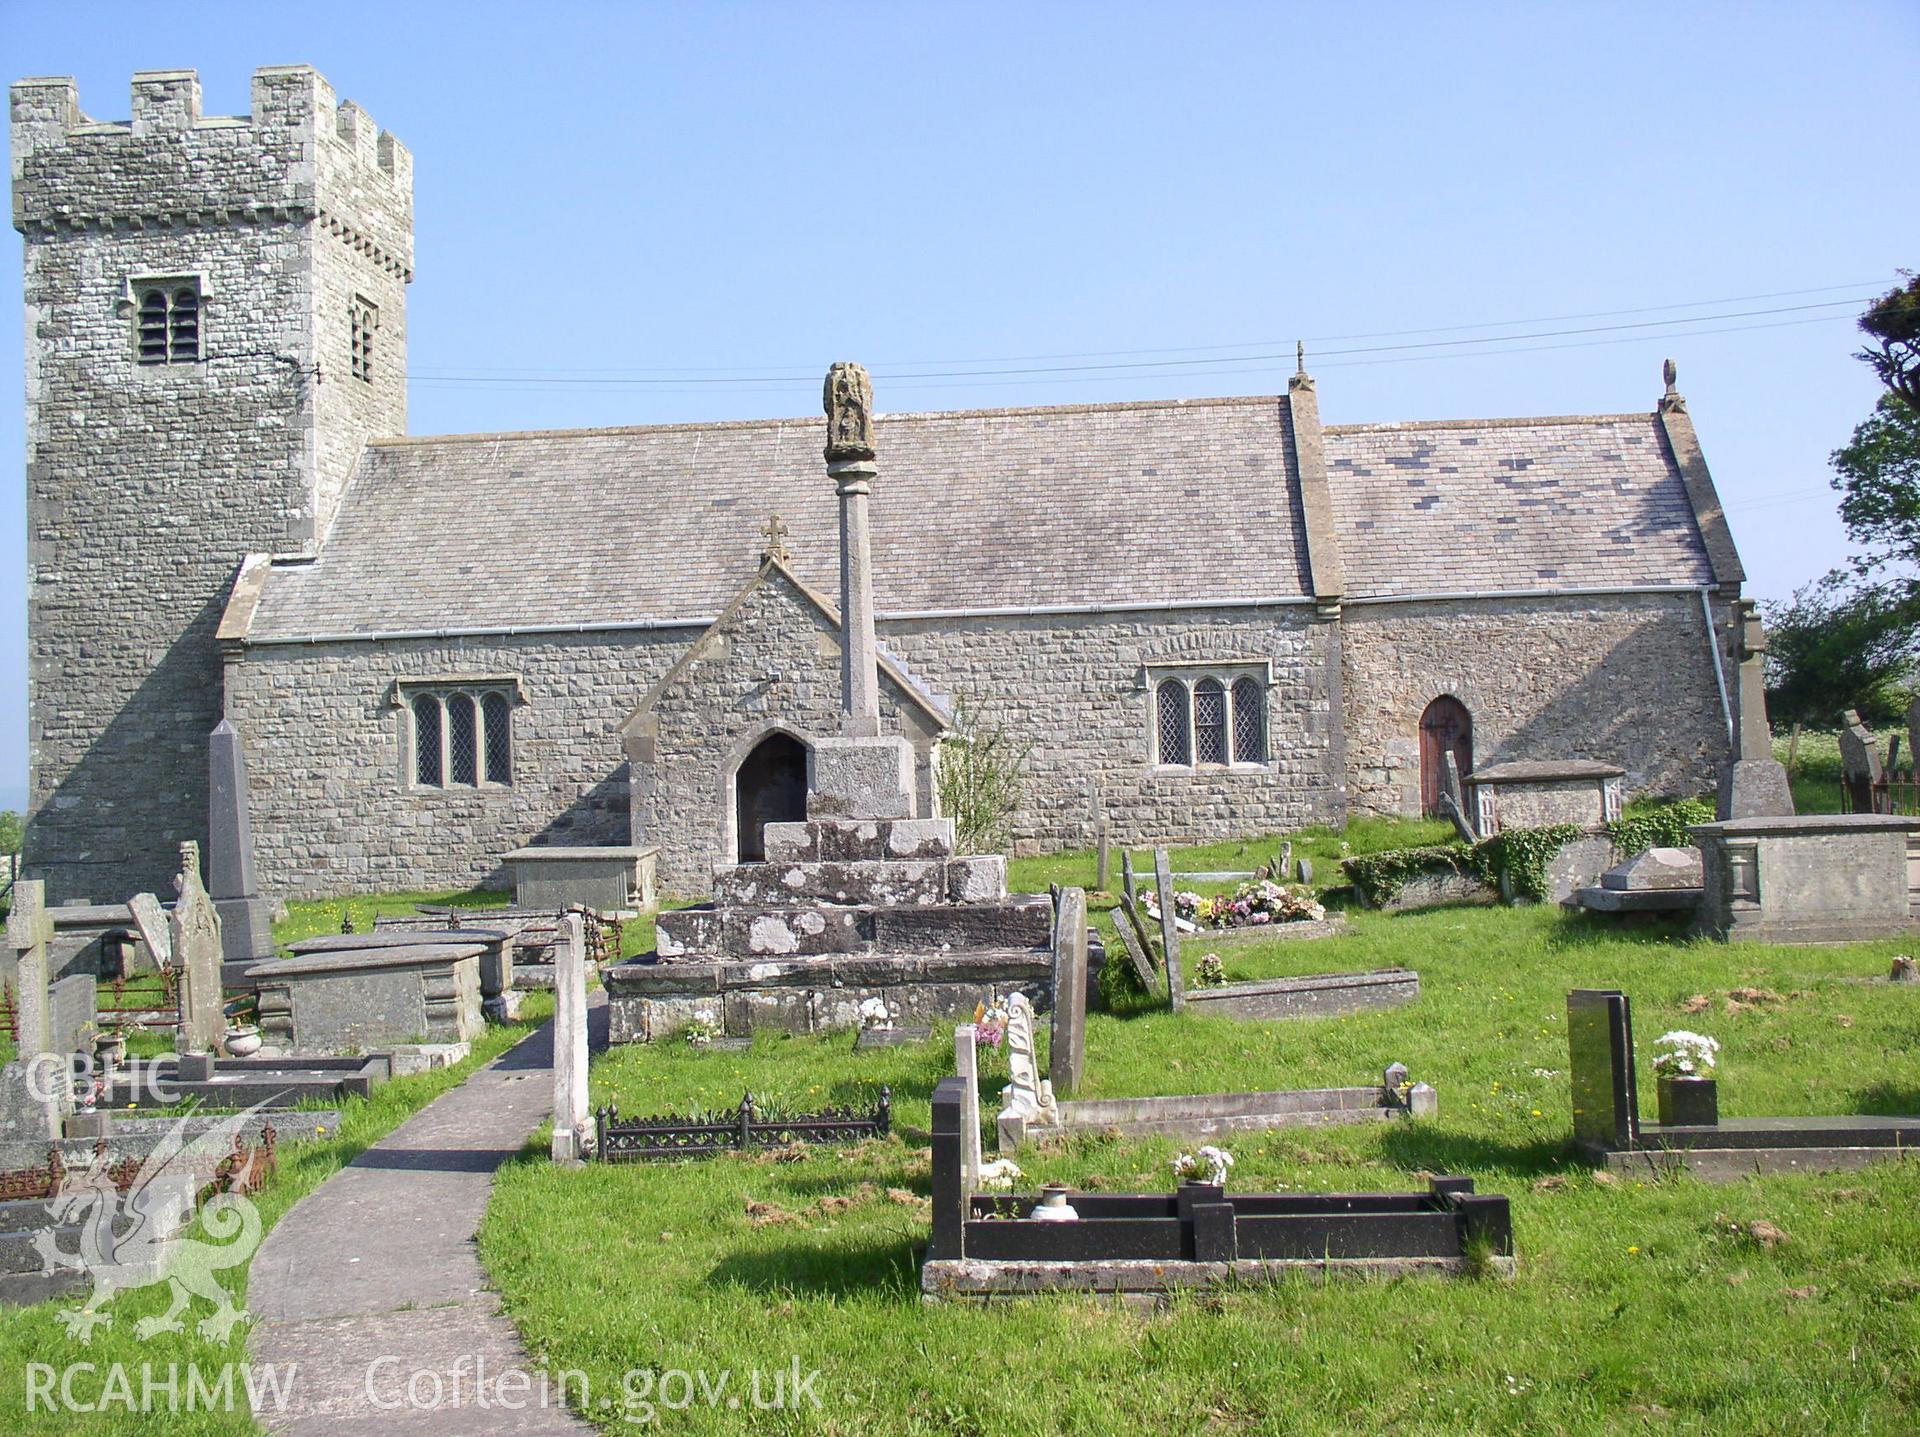 Colour digital photograph showing a front elevation view of St Mary's Church, Penmynydd; Glamorgan.